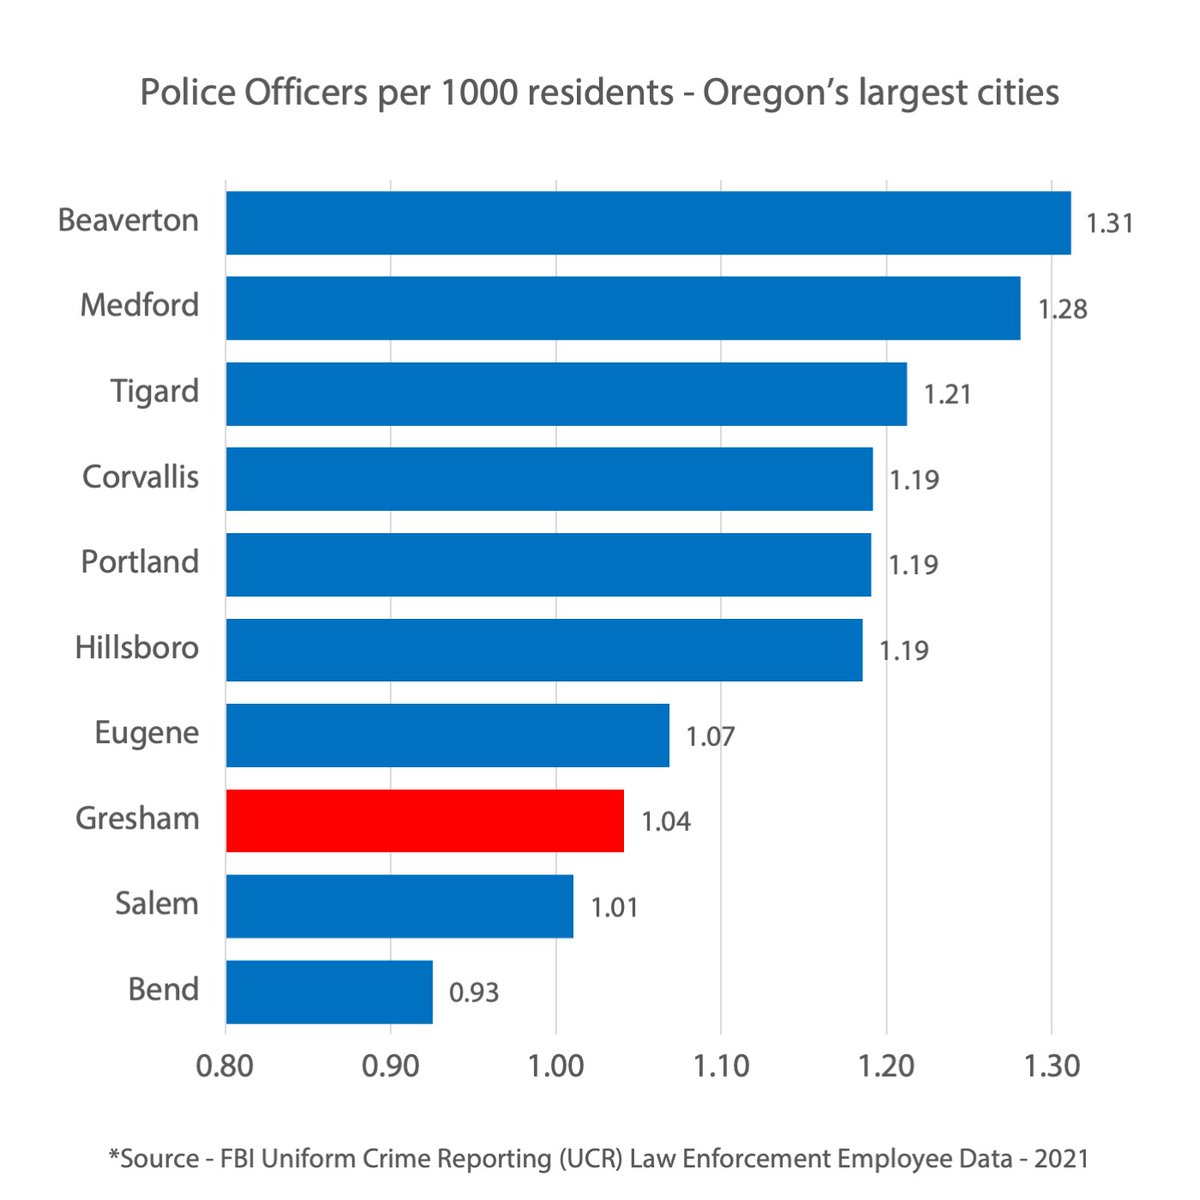 Did you know: Gresham has one of the lowest police-to-resident ratios among Oregon's biggest cities. Learn more: GreshamOregon.gov